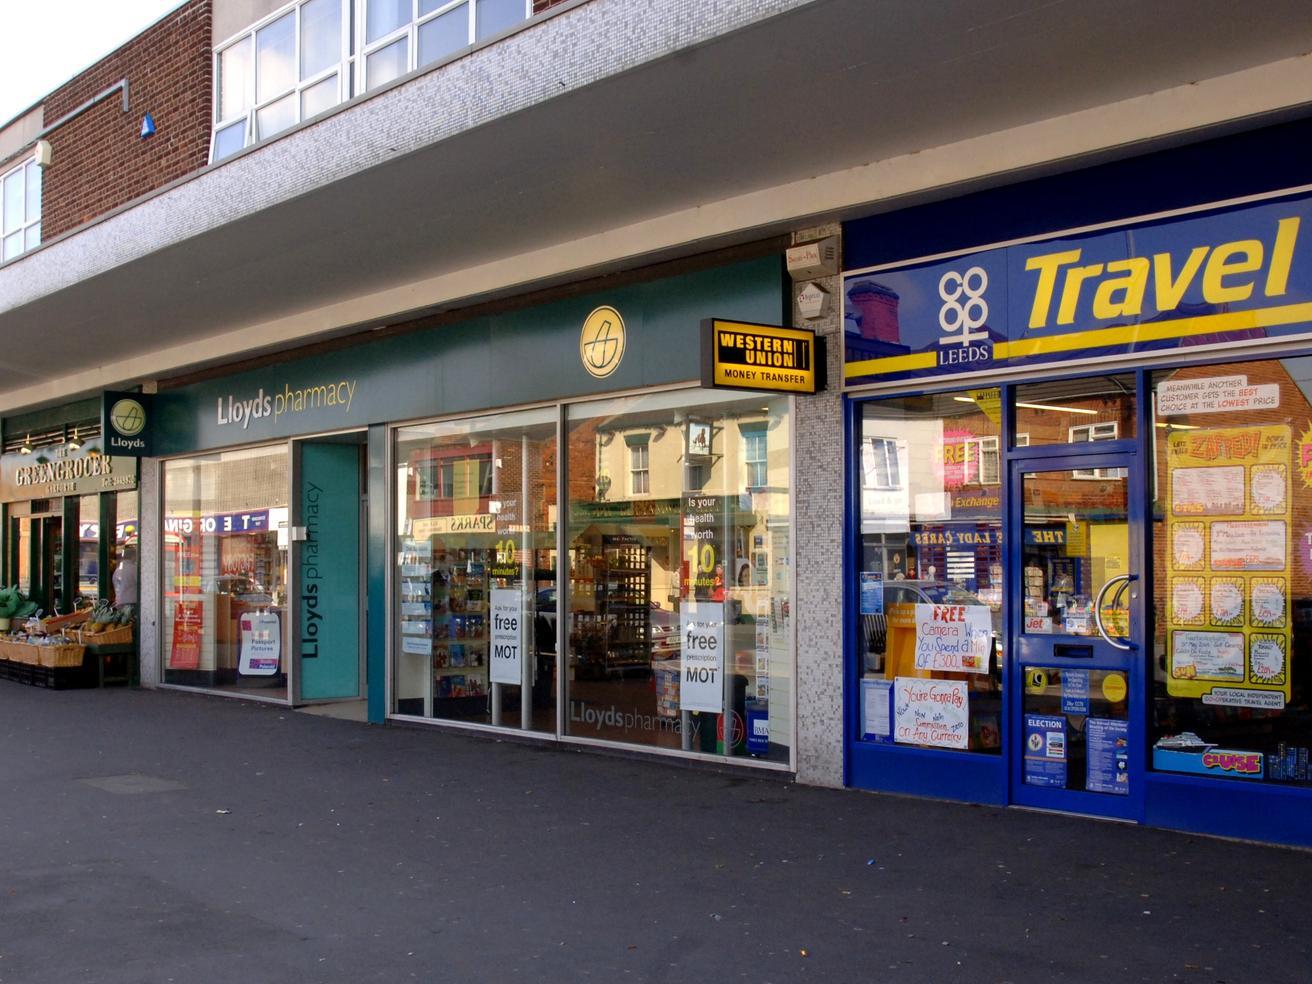 The shops on Main Street in Garforth. Did you visit these in the mid-2000s?